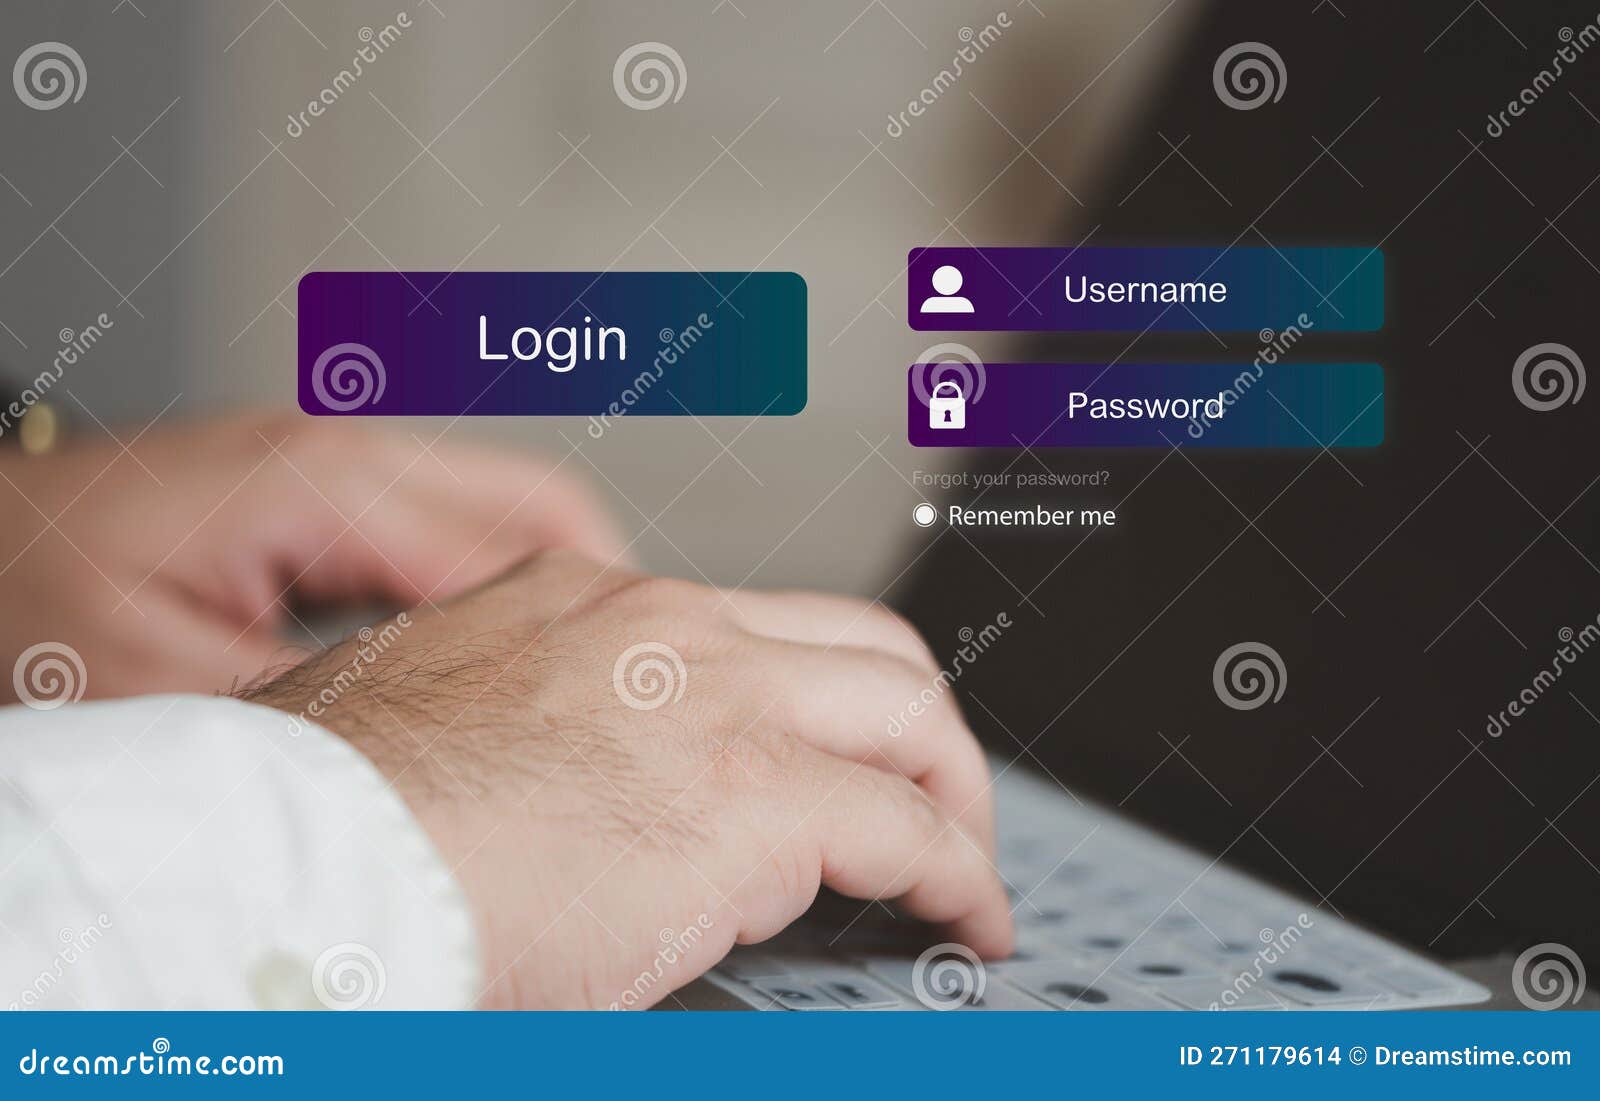 User to login, verification. Login with username and password. User to login, verification, cyber security and data protection, information security and encryption, secure Internet access, cybersecurity. Login with username and password